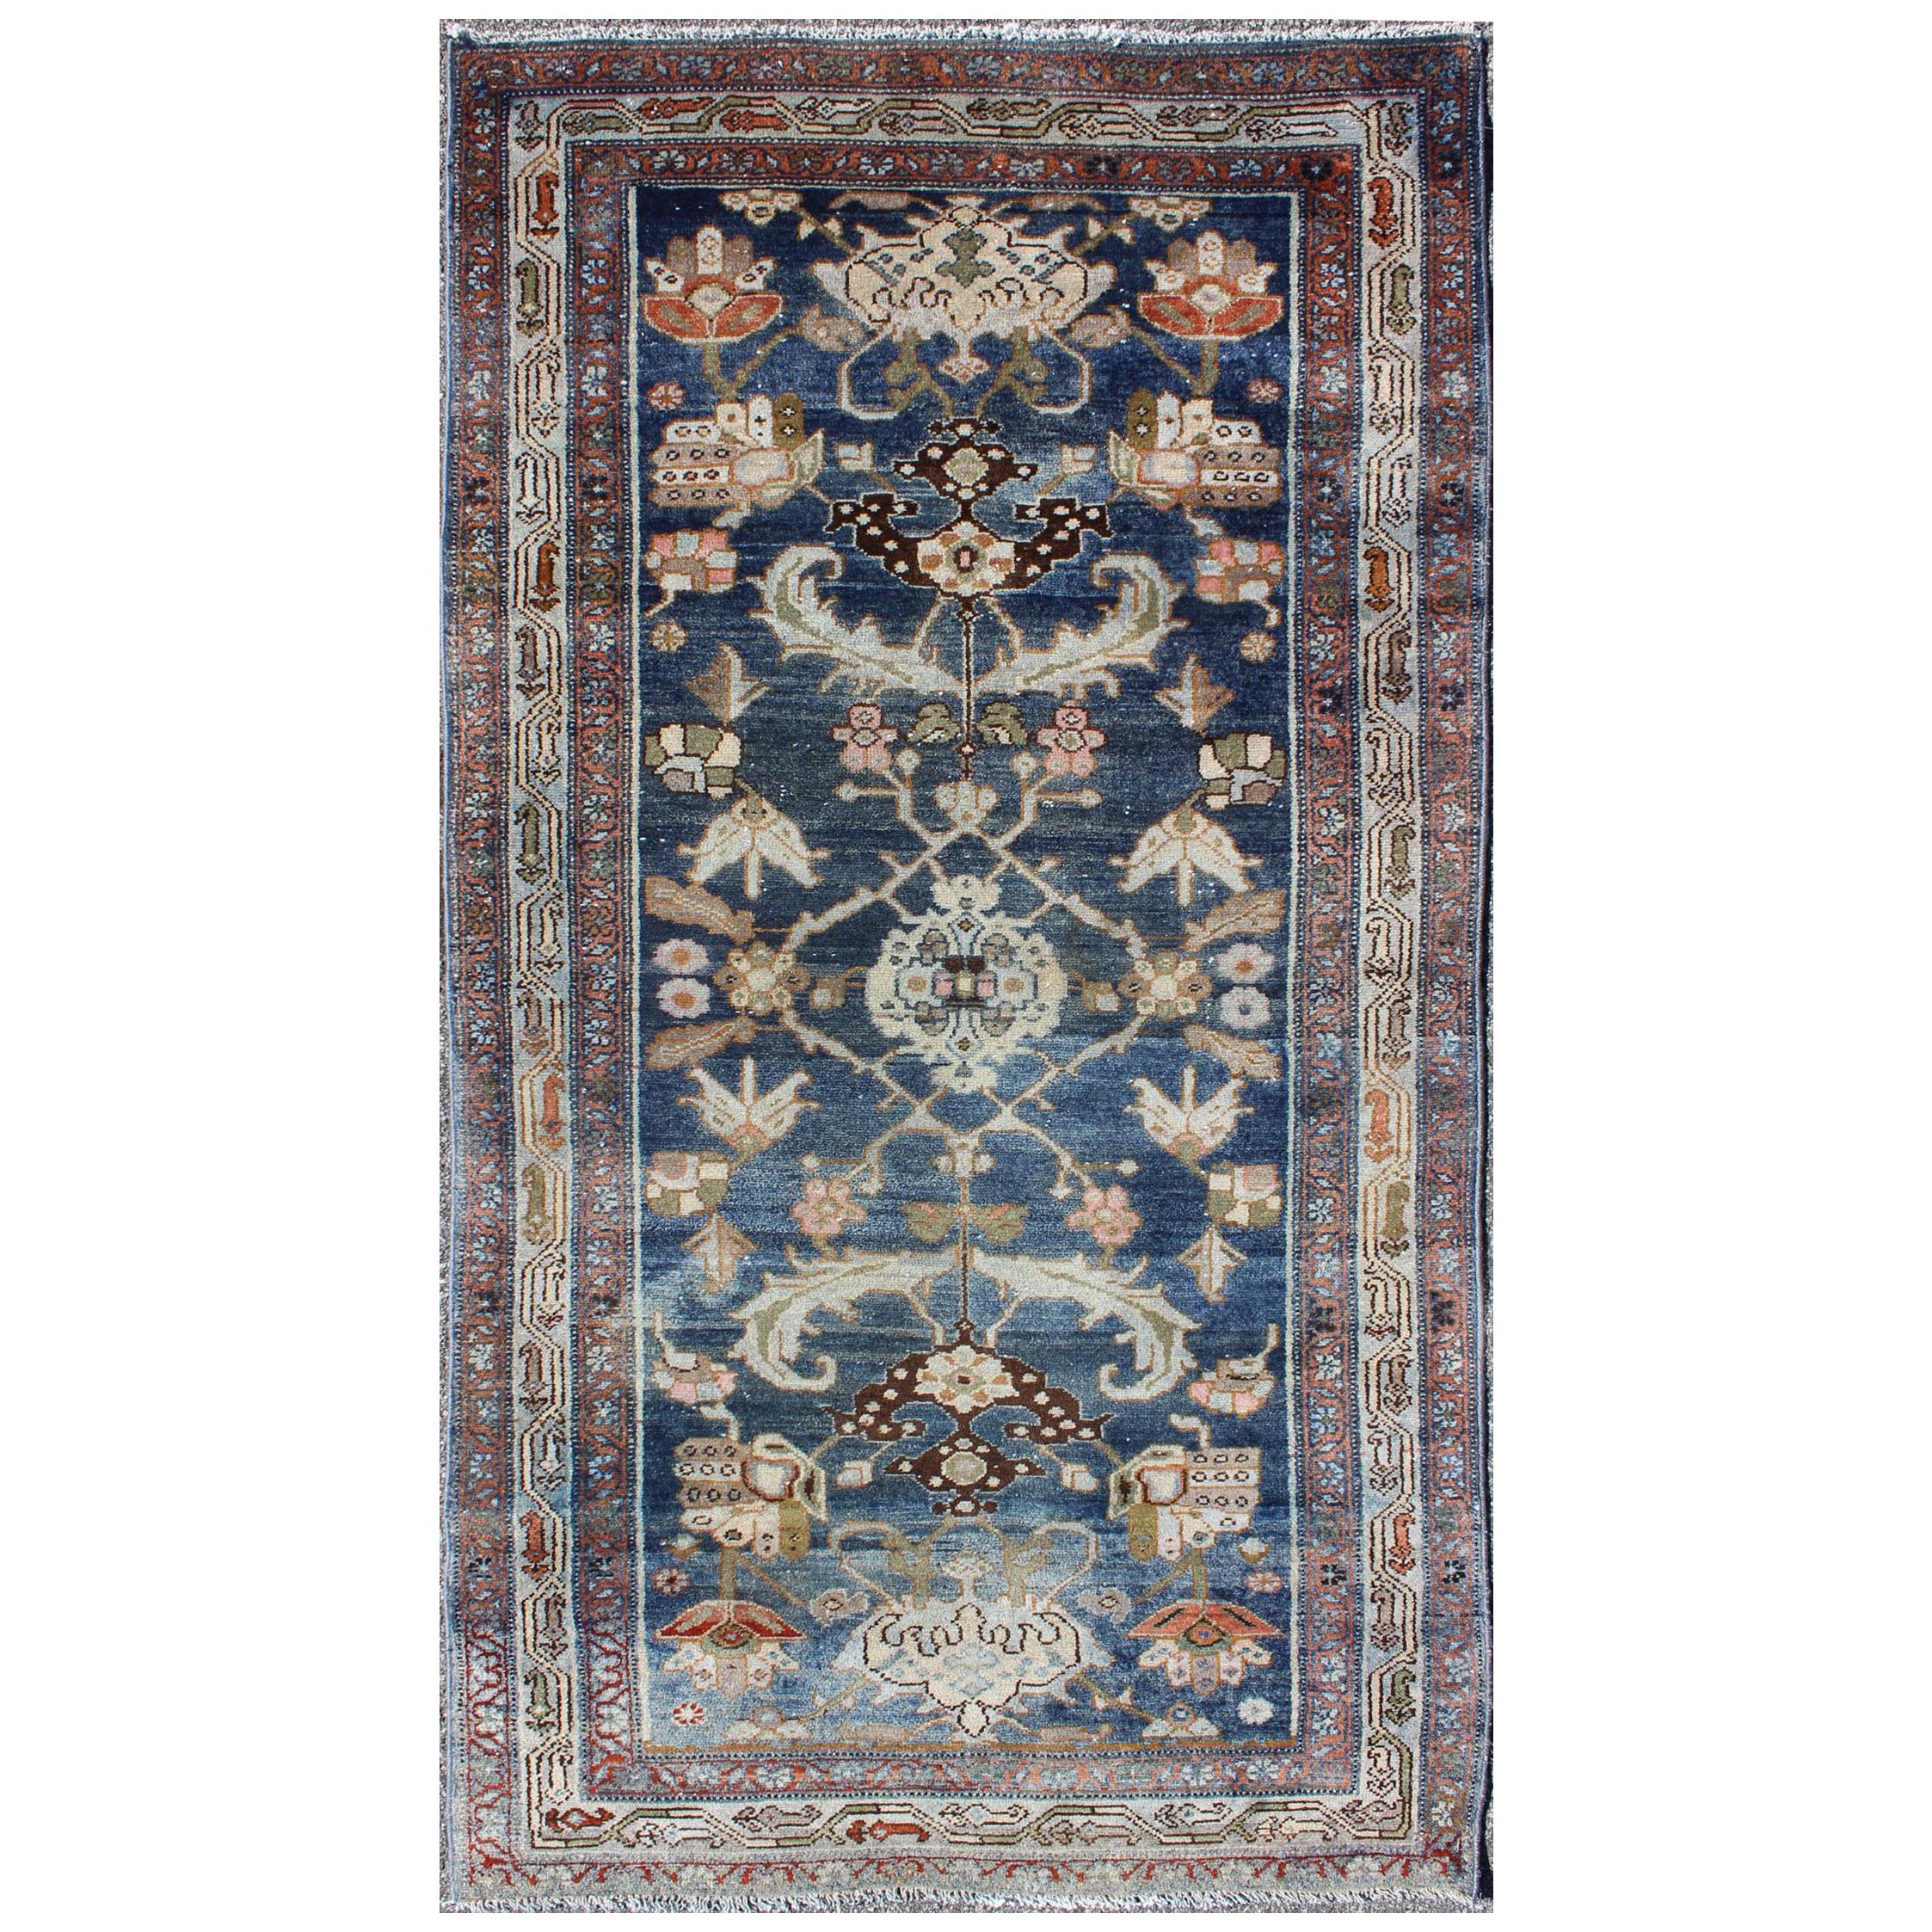 Antique Persian Hamedan Rug with Dark Blue Field and Stylized Floral Design